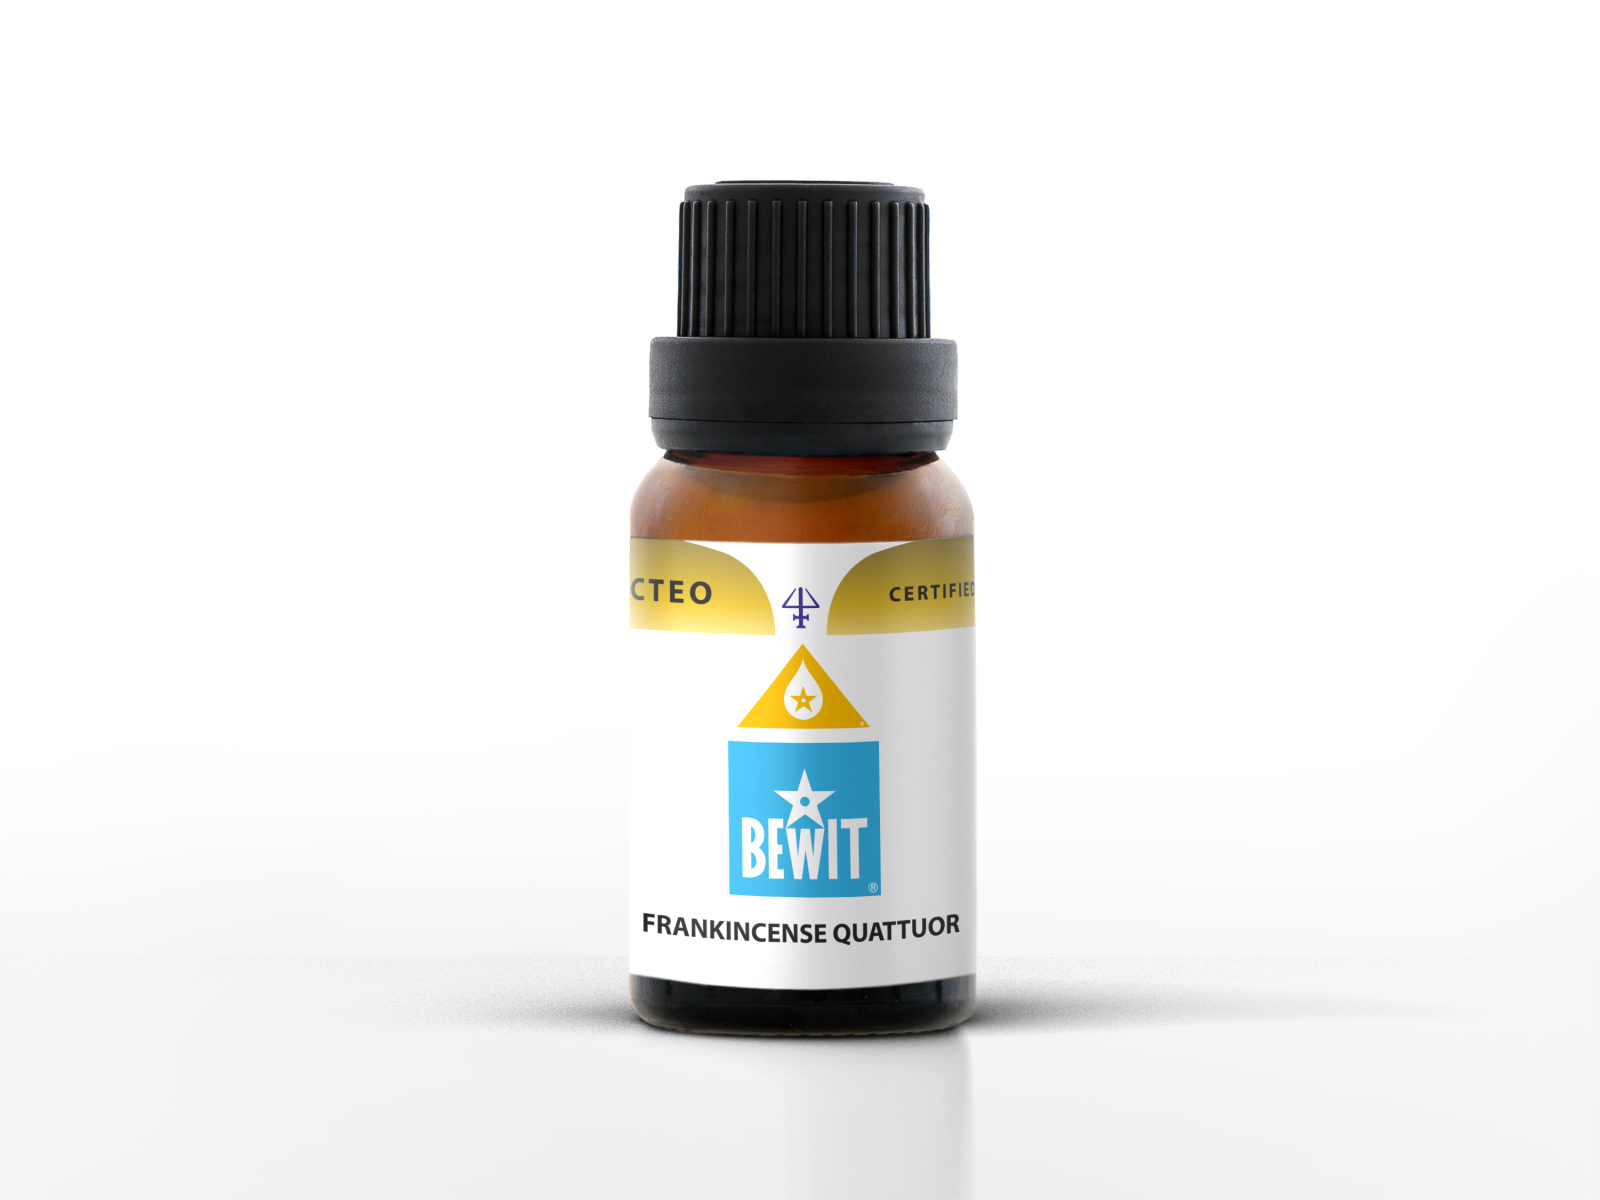 BEWIT Frankincense Quattuor - 100% natural essential oil blend in CTEO® quality